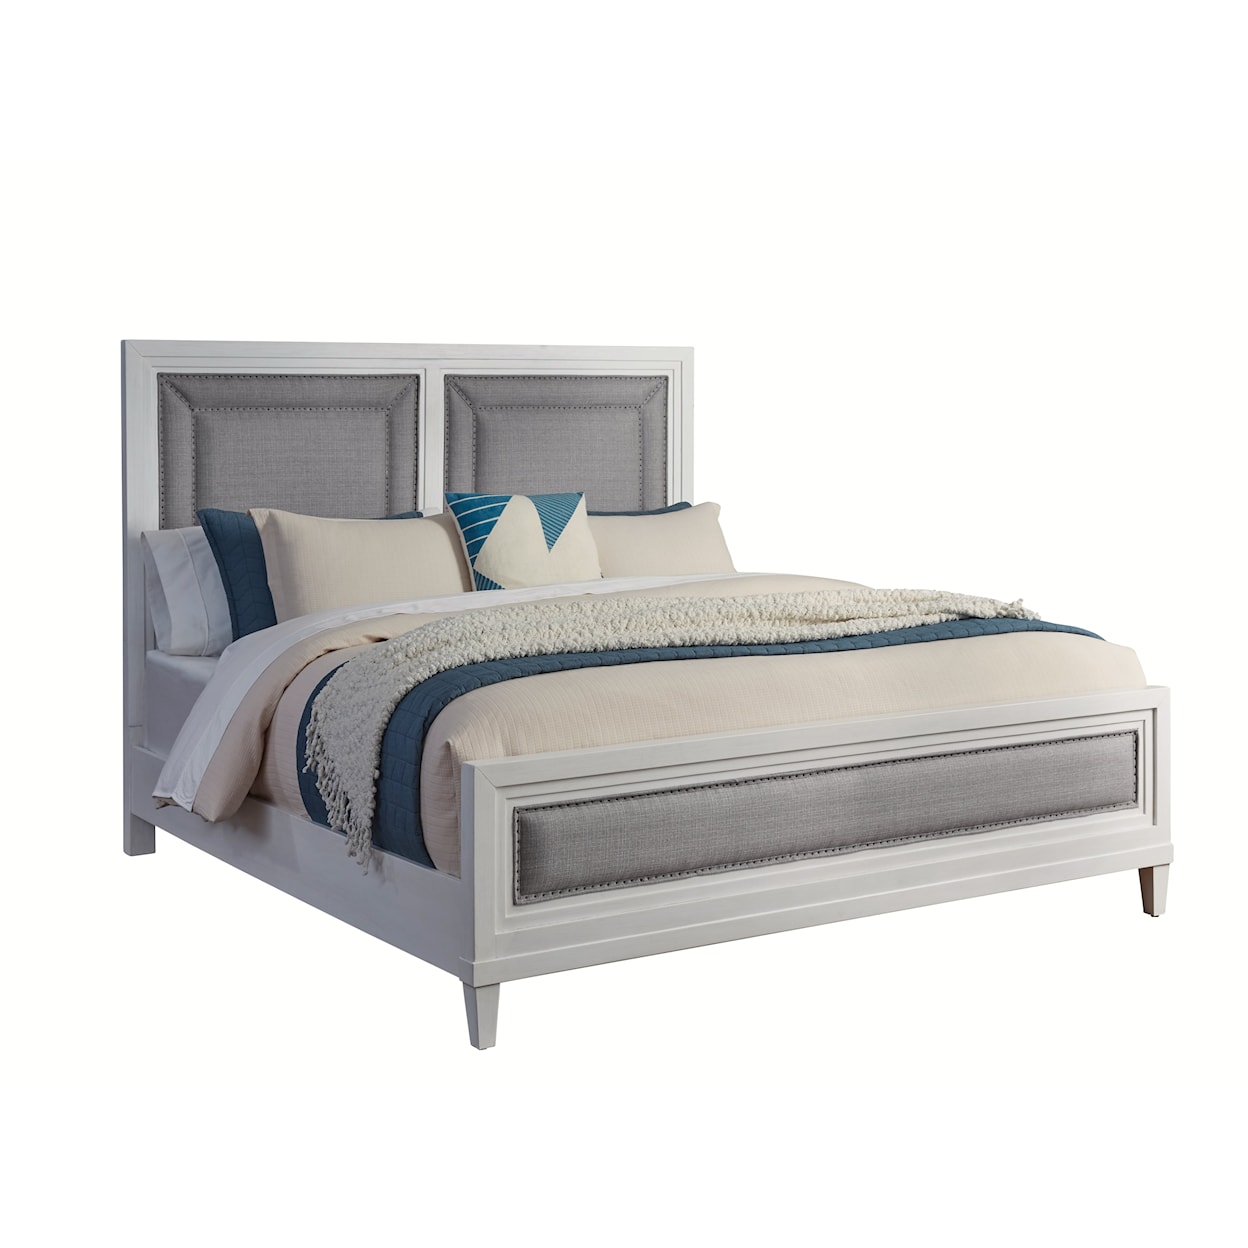 American Woodcrafters Dunescape Queen Upholstered Bed